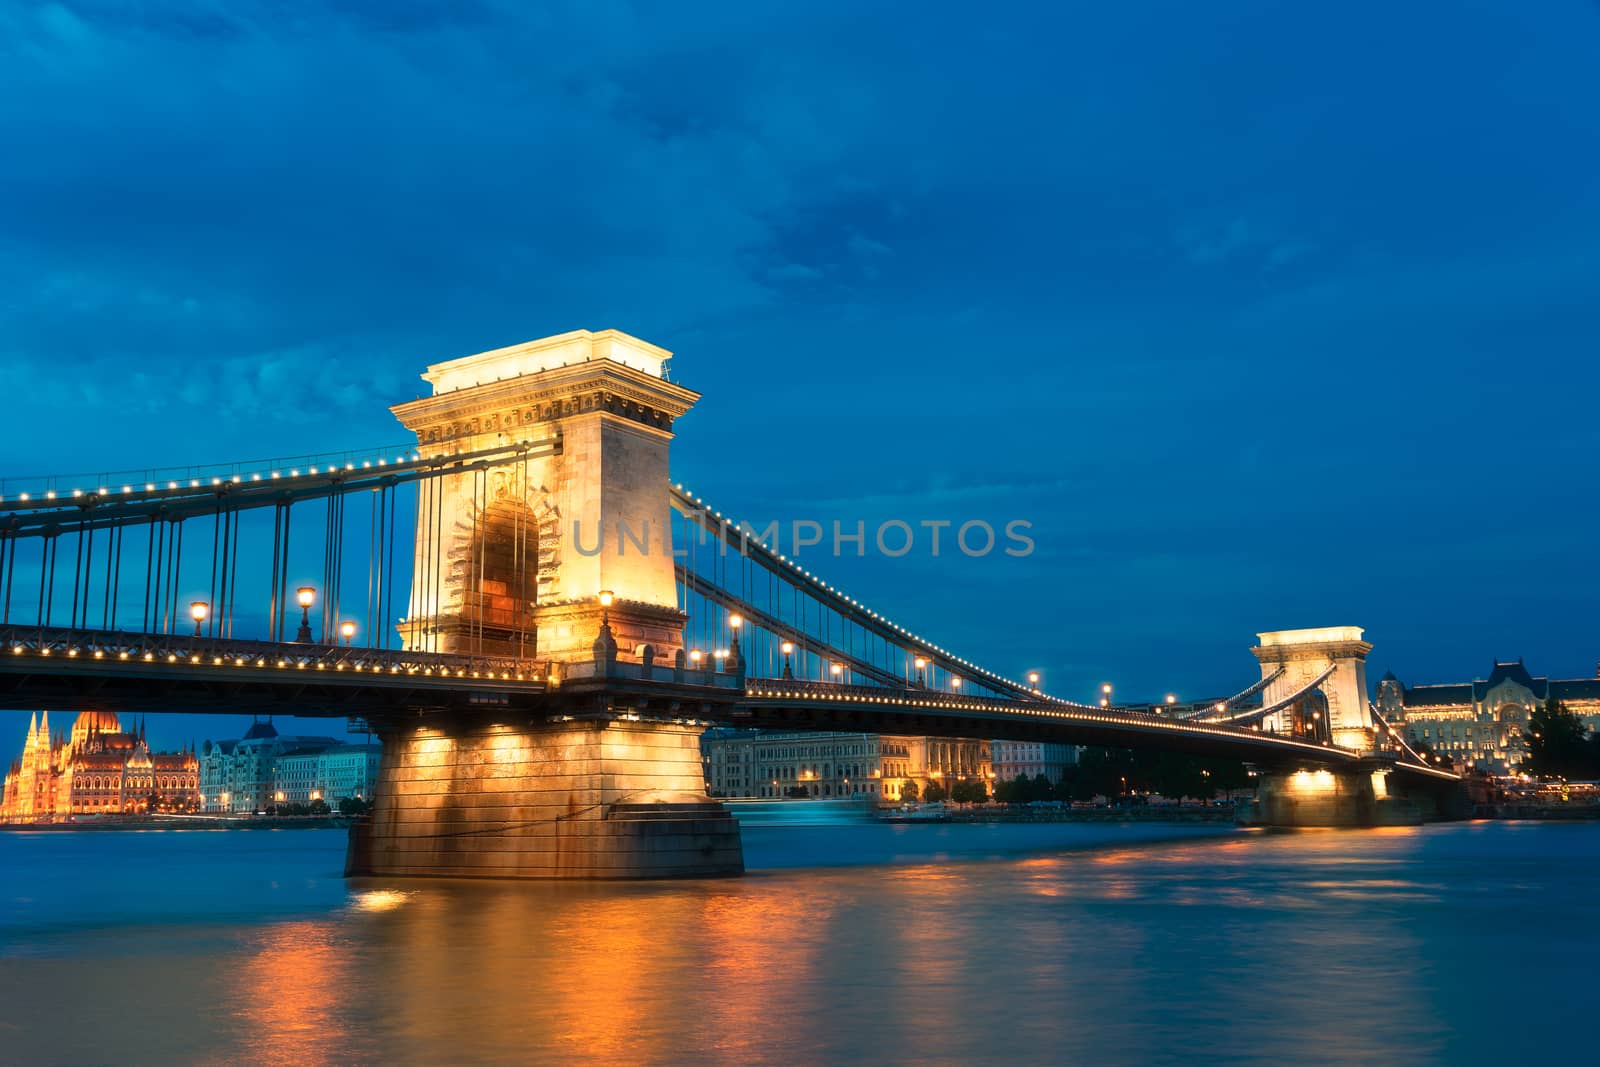 Szechenyi Chain Bridge in Budapest Hungary by adonis_abril